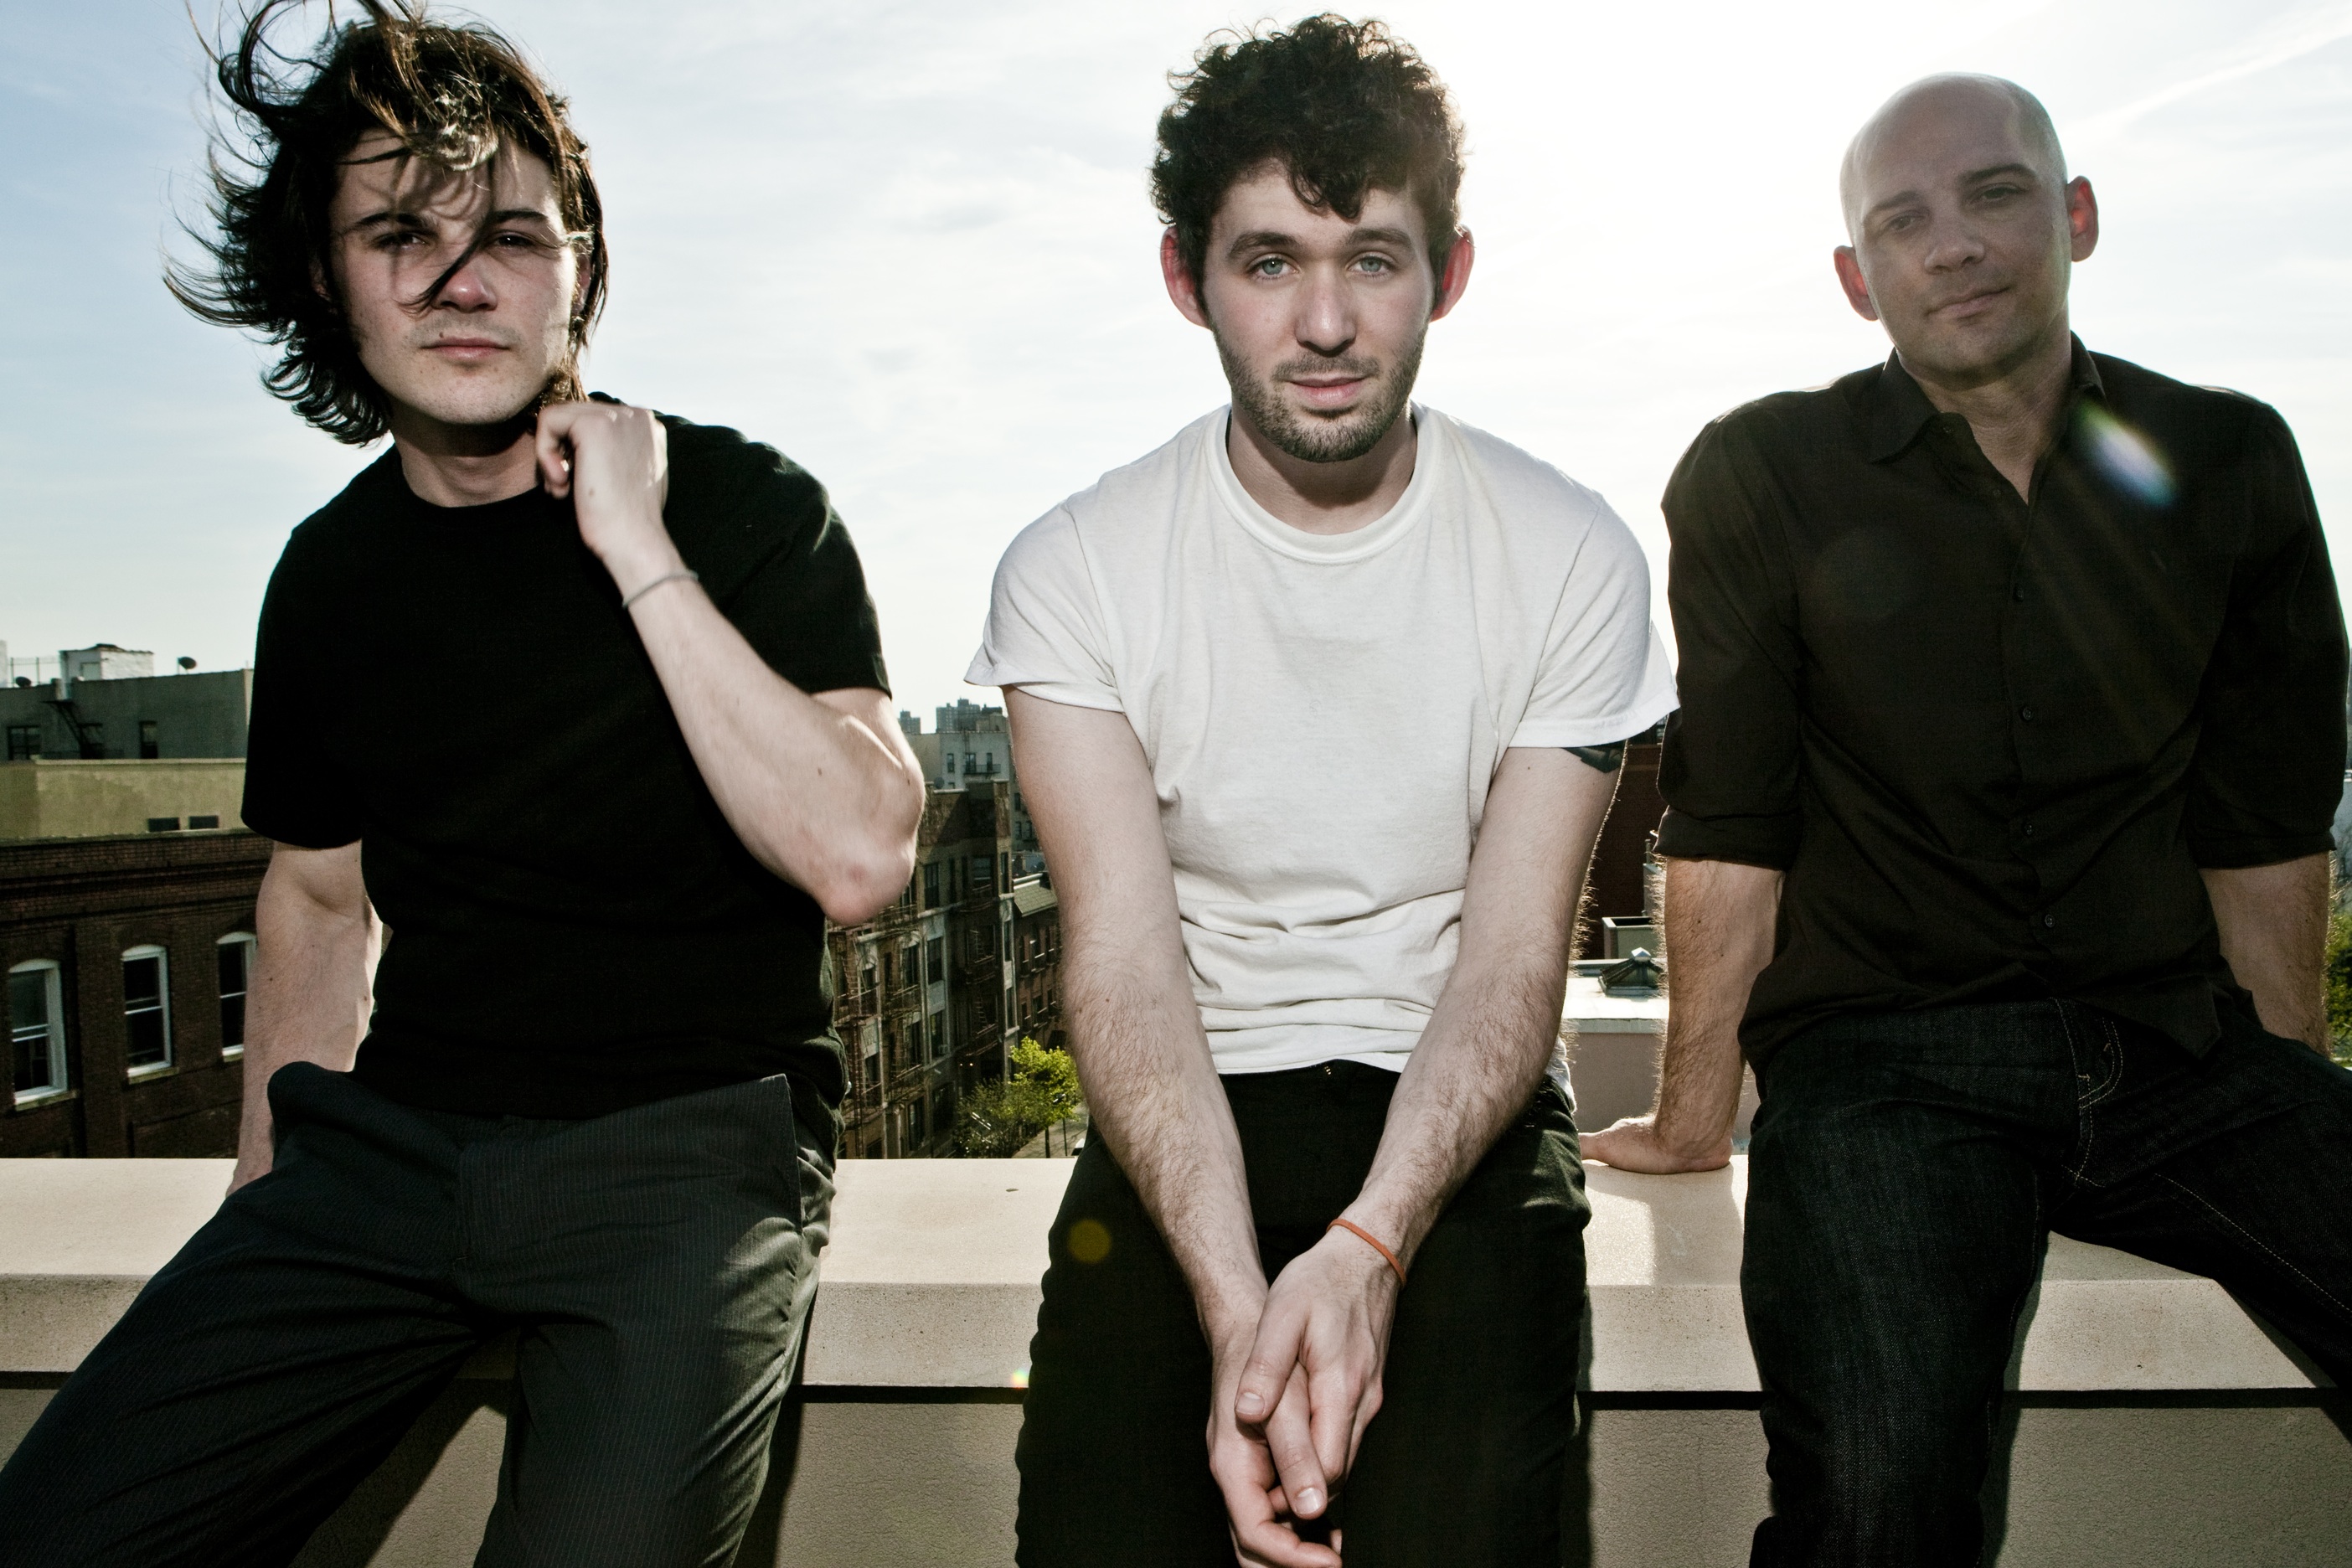 The Antlers - Portraits